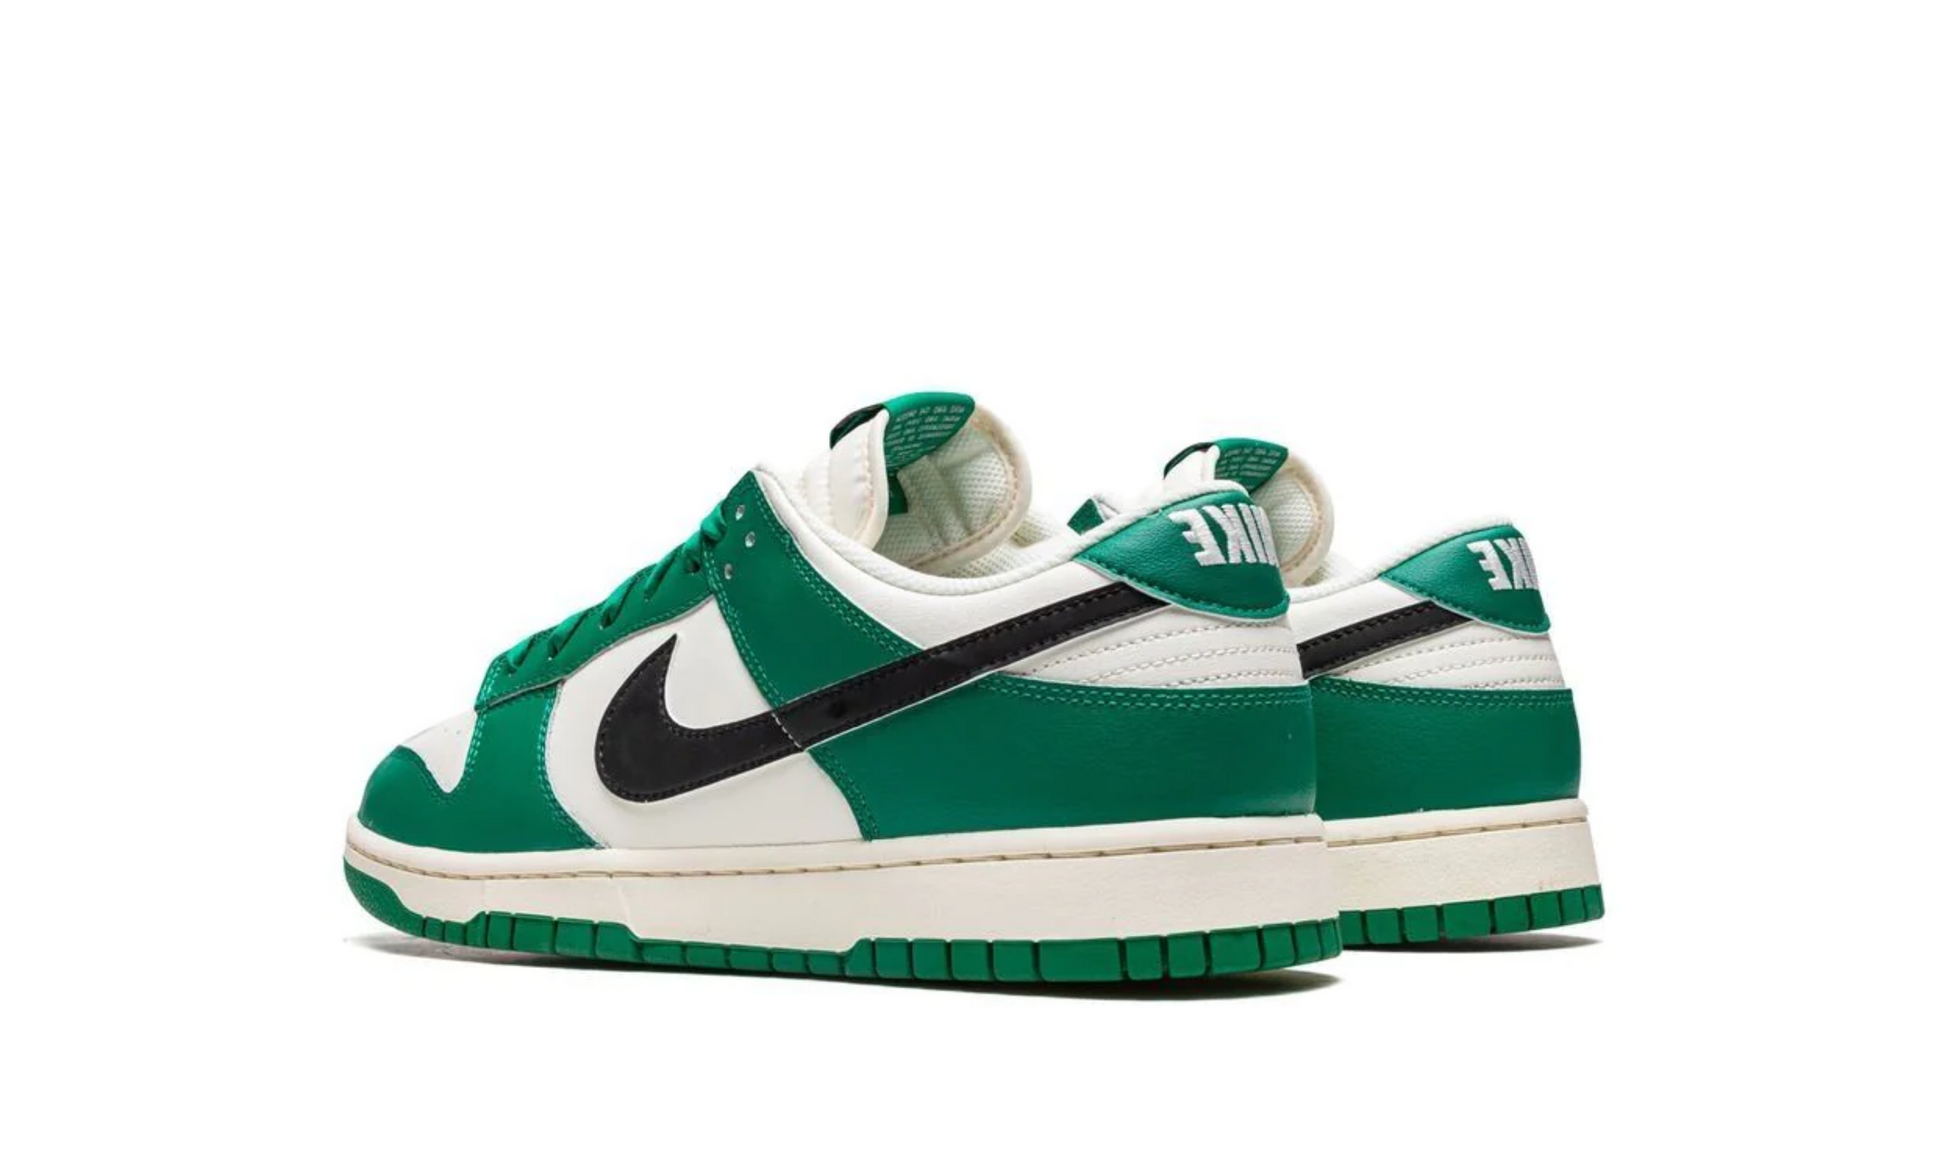 Nike Dunk Low sneakers in white and green